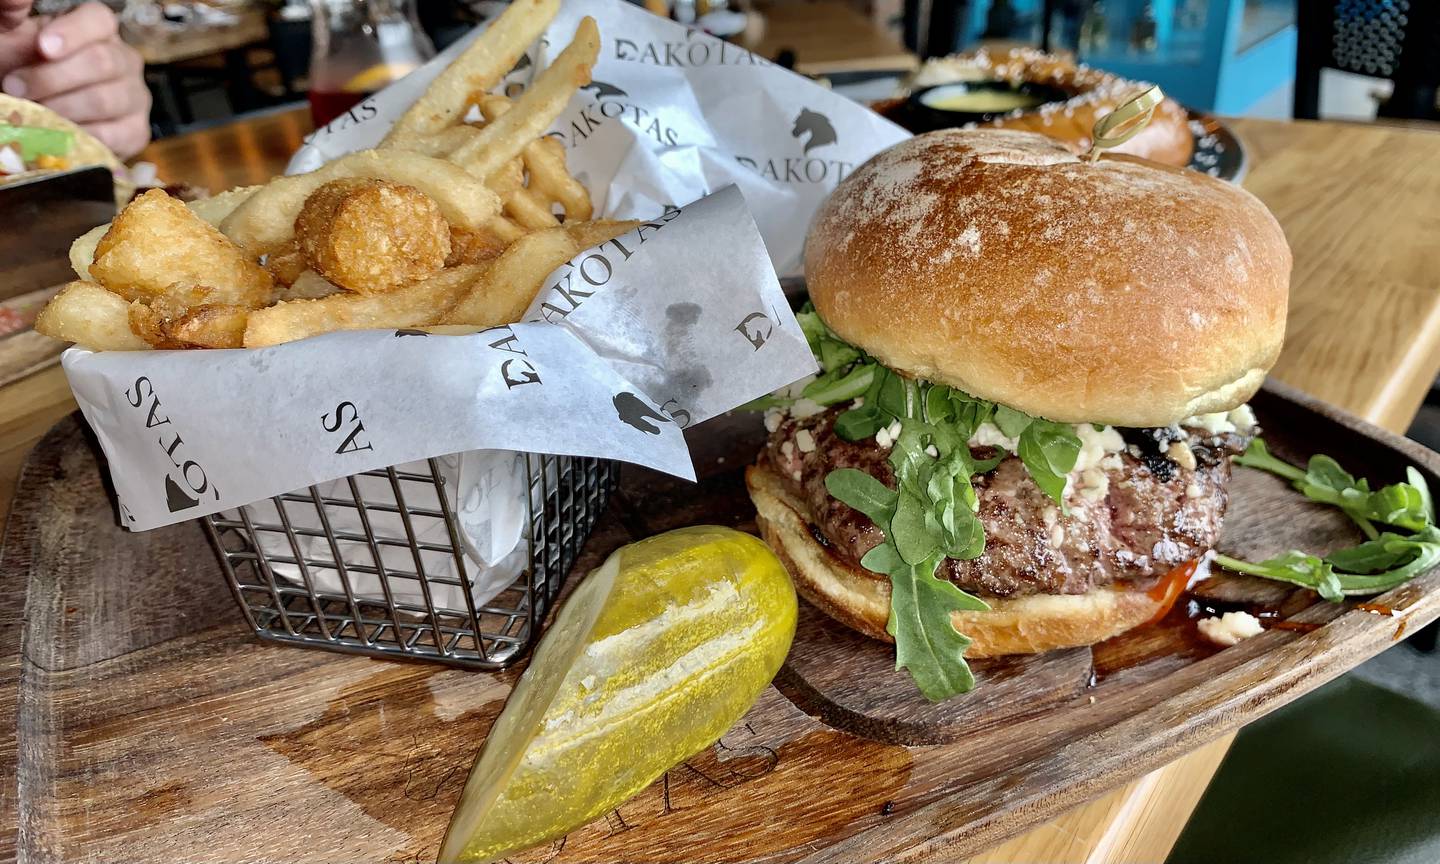 The truffle burger is a rich, decadent plate masquerading as bar food. You won't find this burger on another menu in Yorkville.